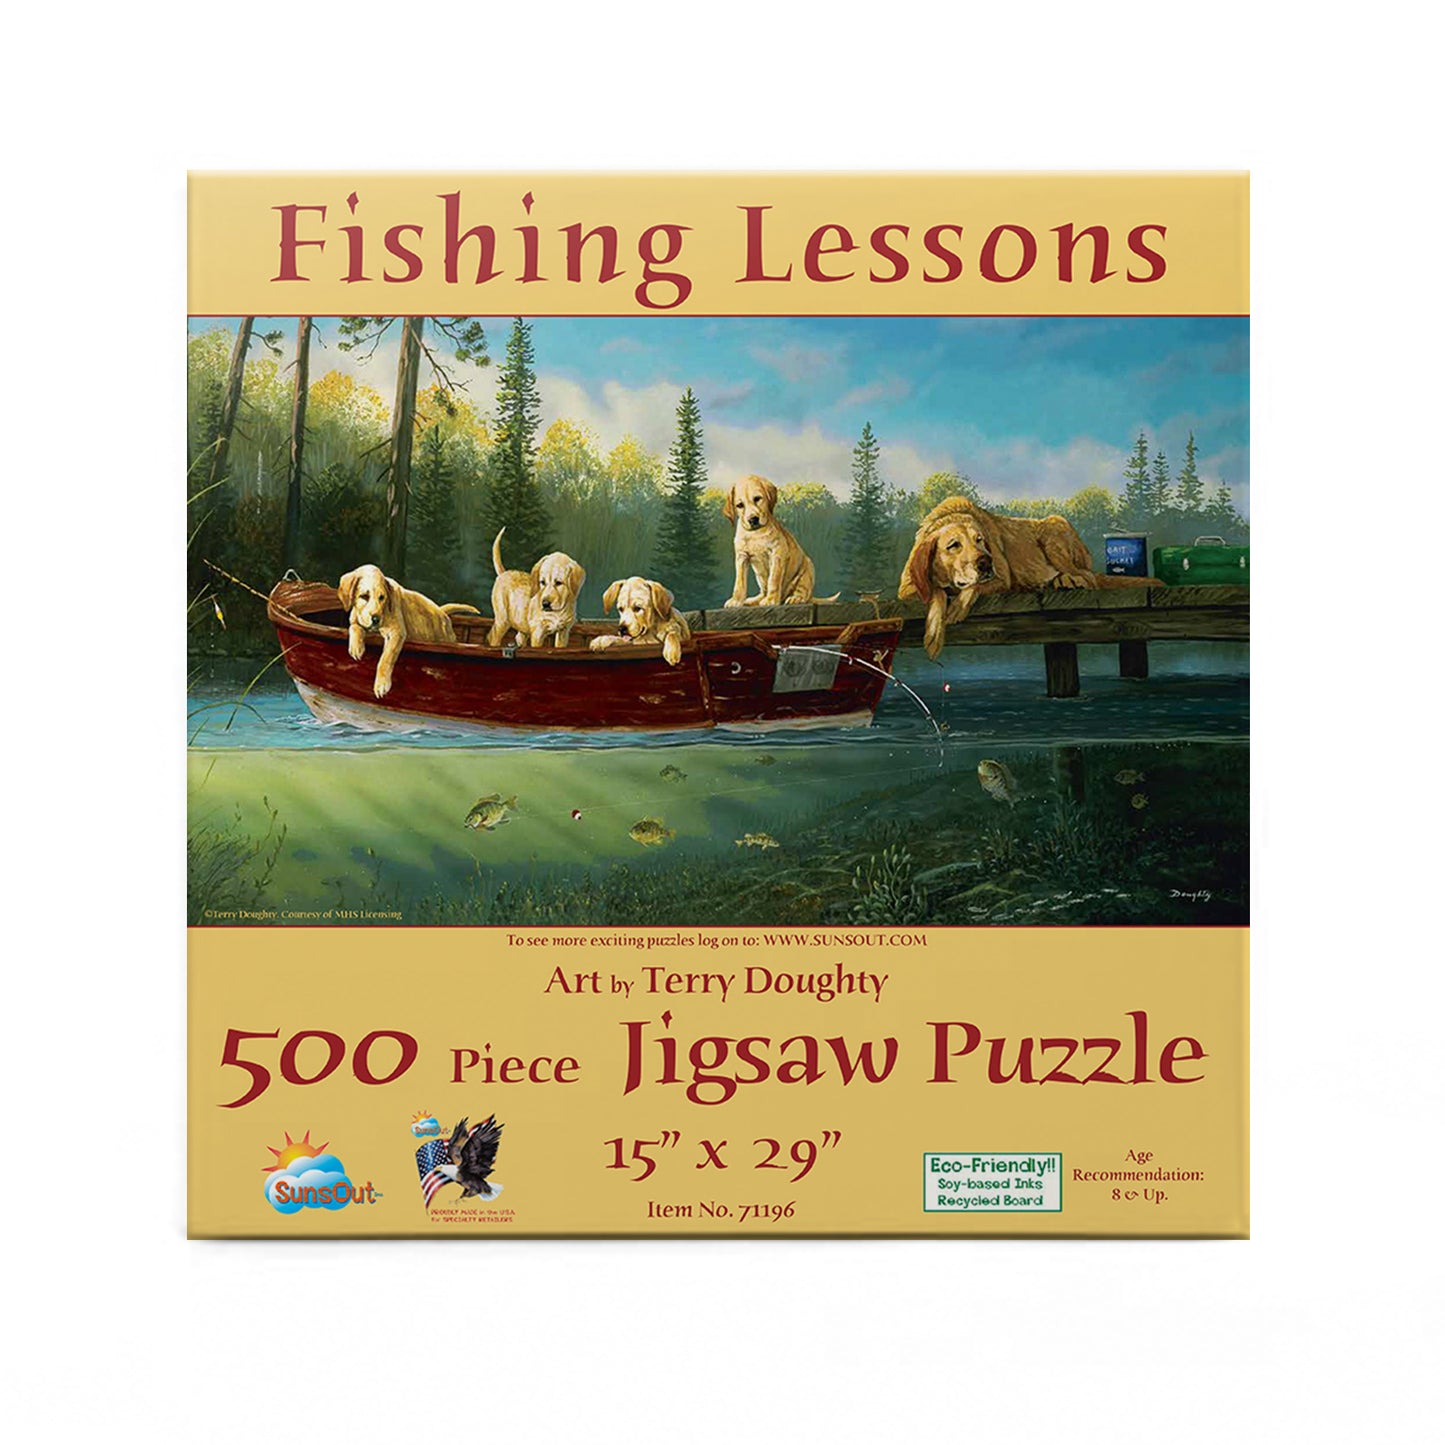 Fishing Lessons - 500 Piece Jigsaw Puzzle